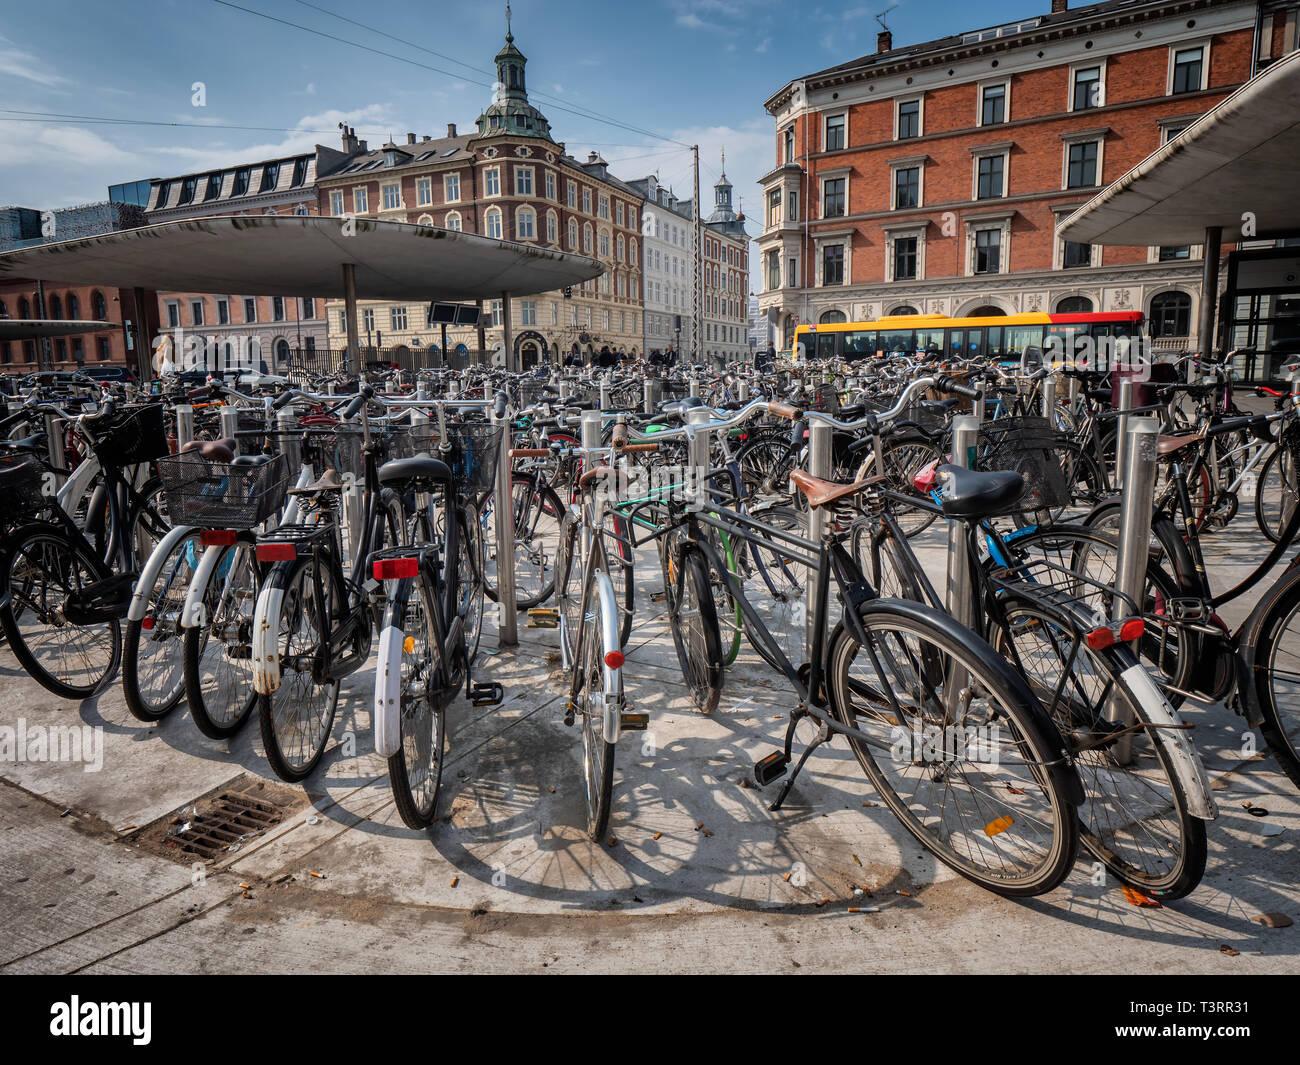 Bicycles parked in central Copenhagen, Denmark Stock Photo